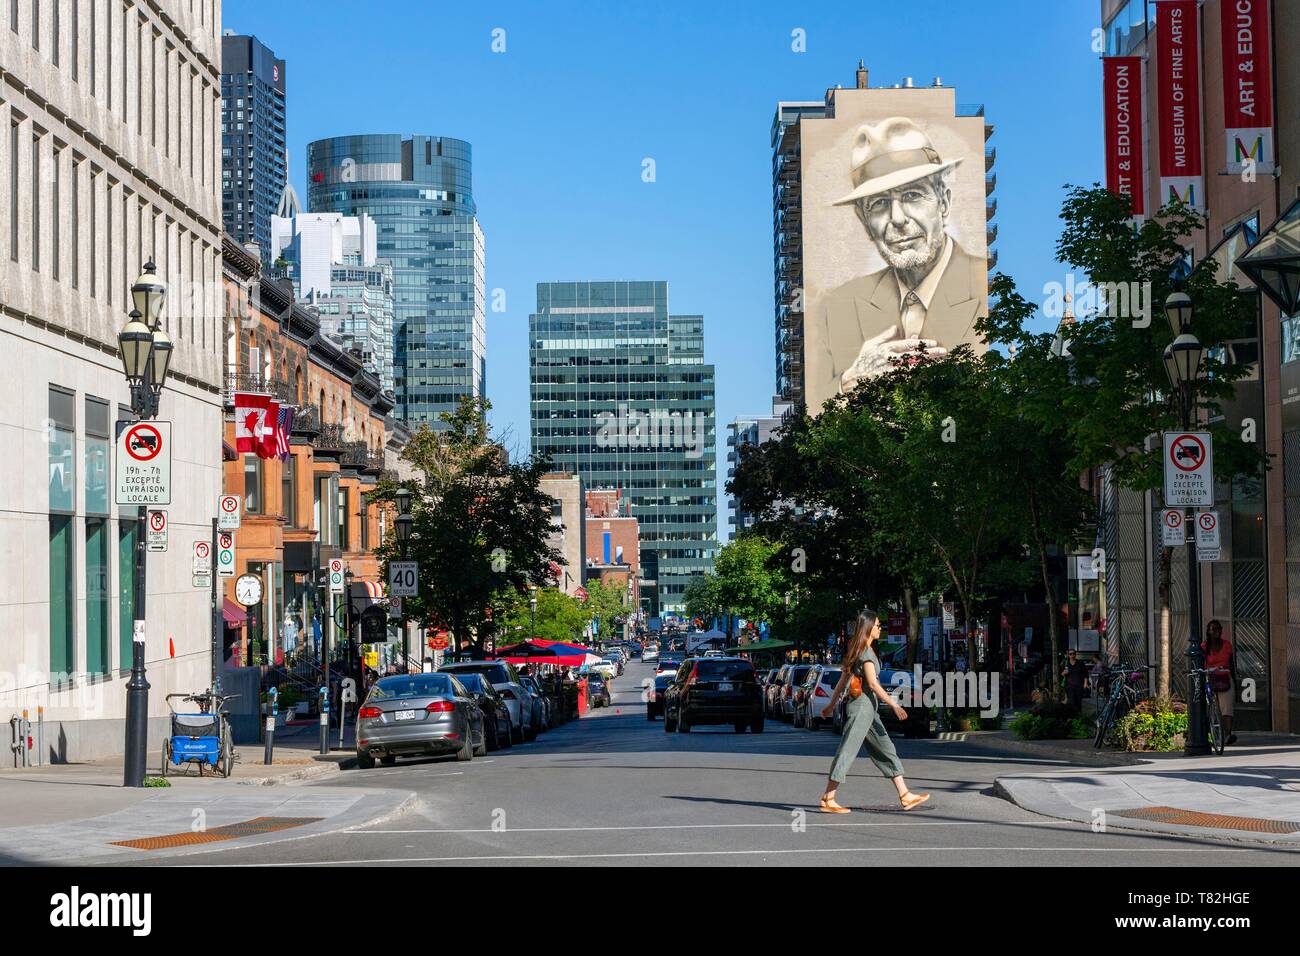 Canada, Province of Quebec, Montreal, Crescent Street, giant fresco of Léonard Cohen by two artists - the American El Mac and the Montrealer Gene Pendon (nicknamed Starship) Stock Photo